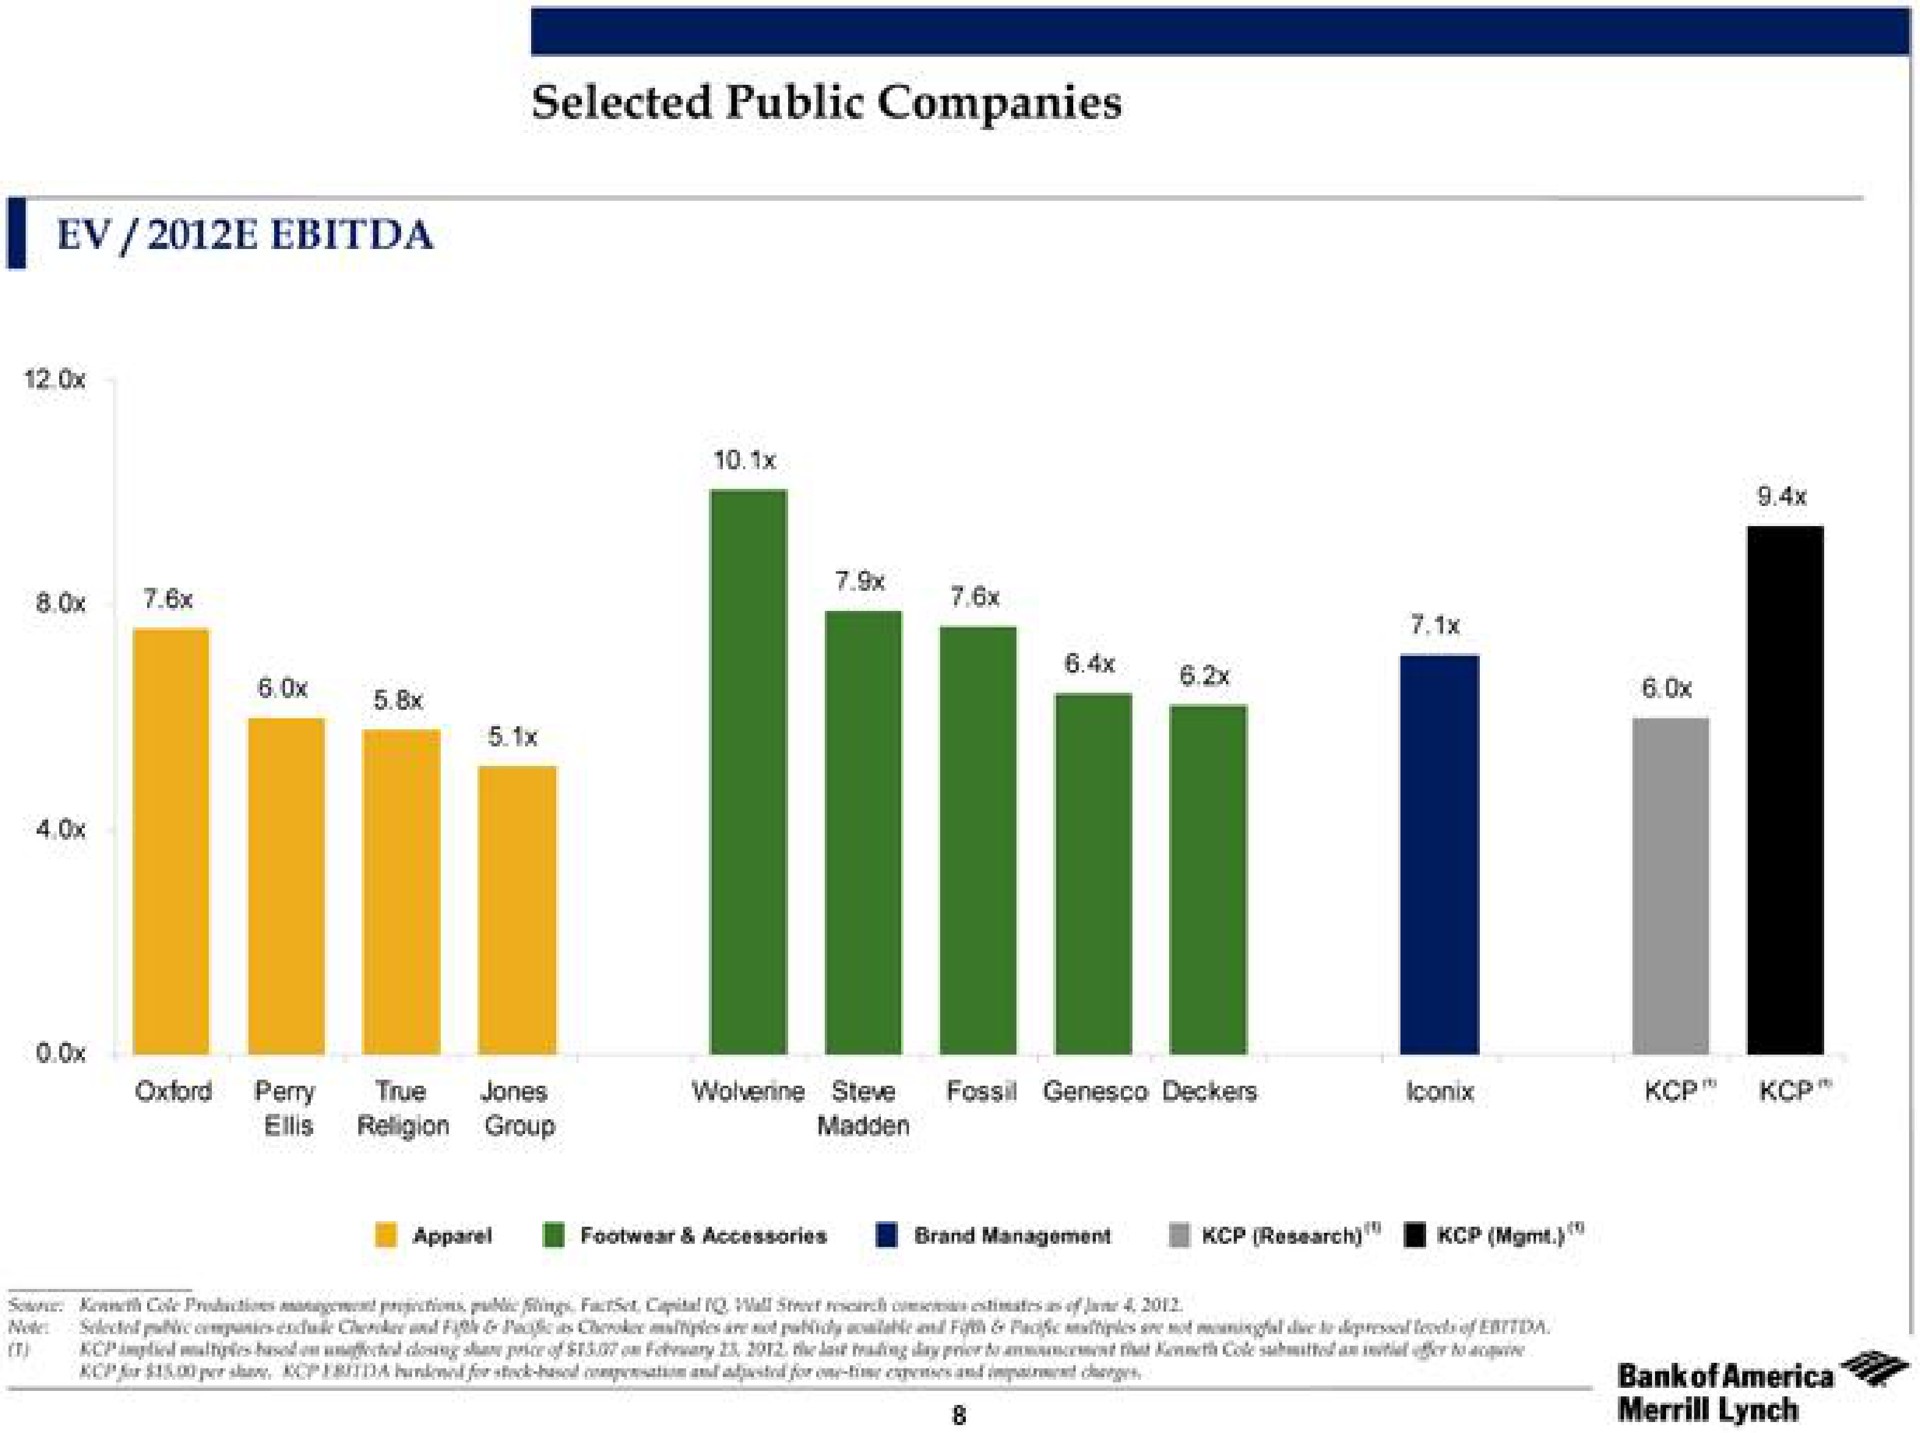 selected public companies | Bank of America